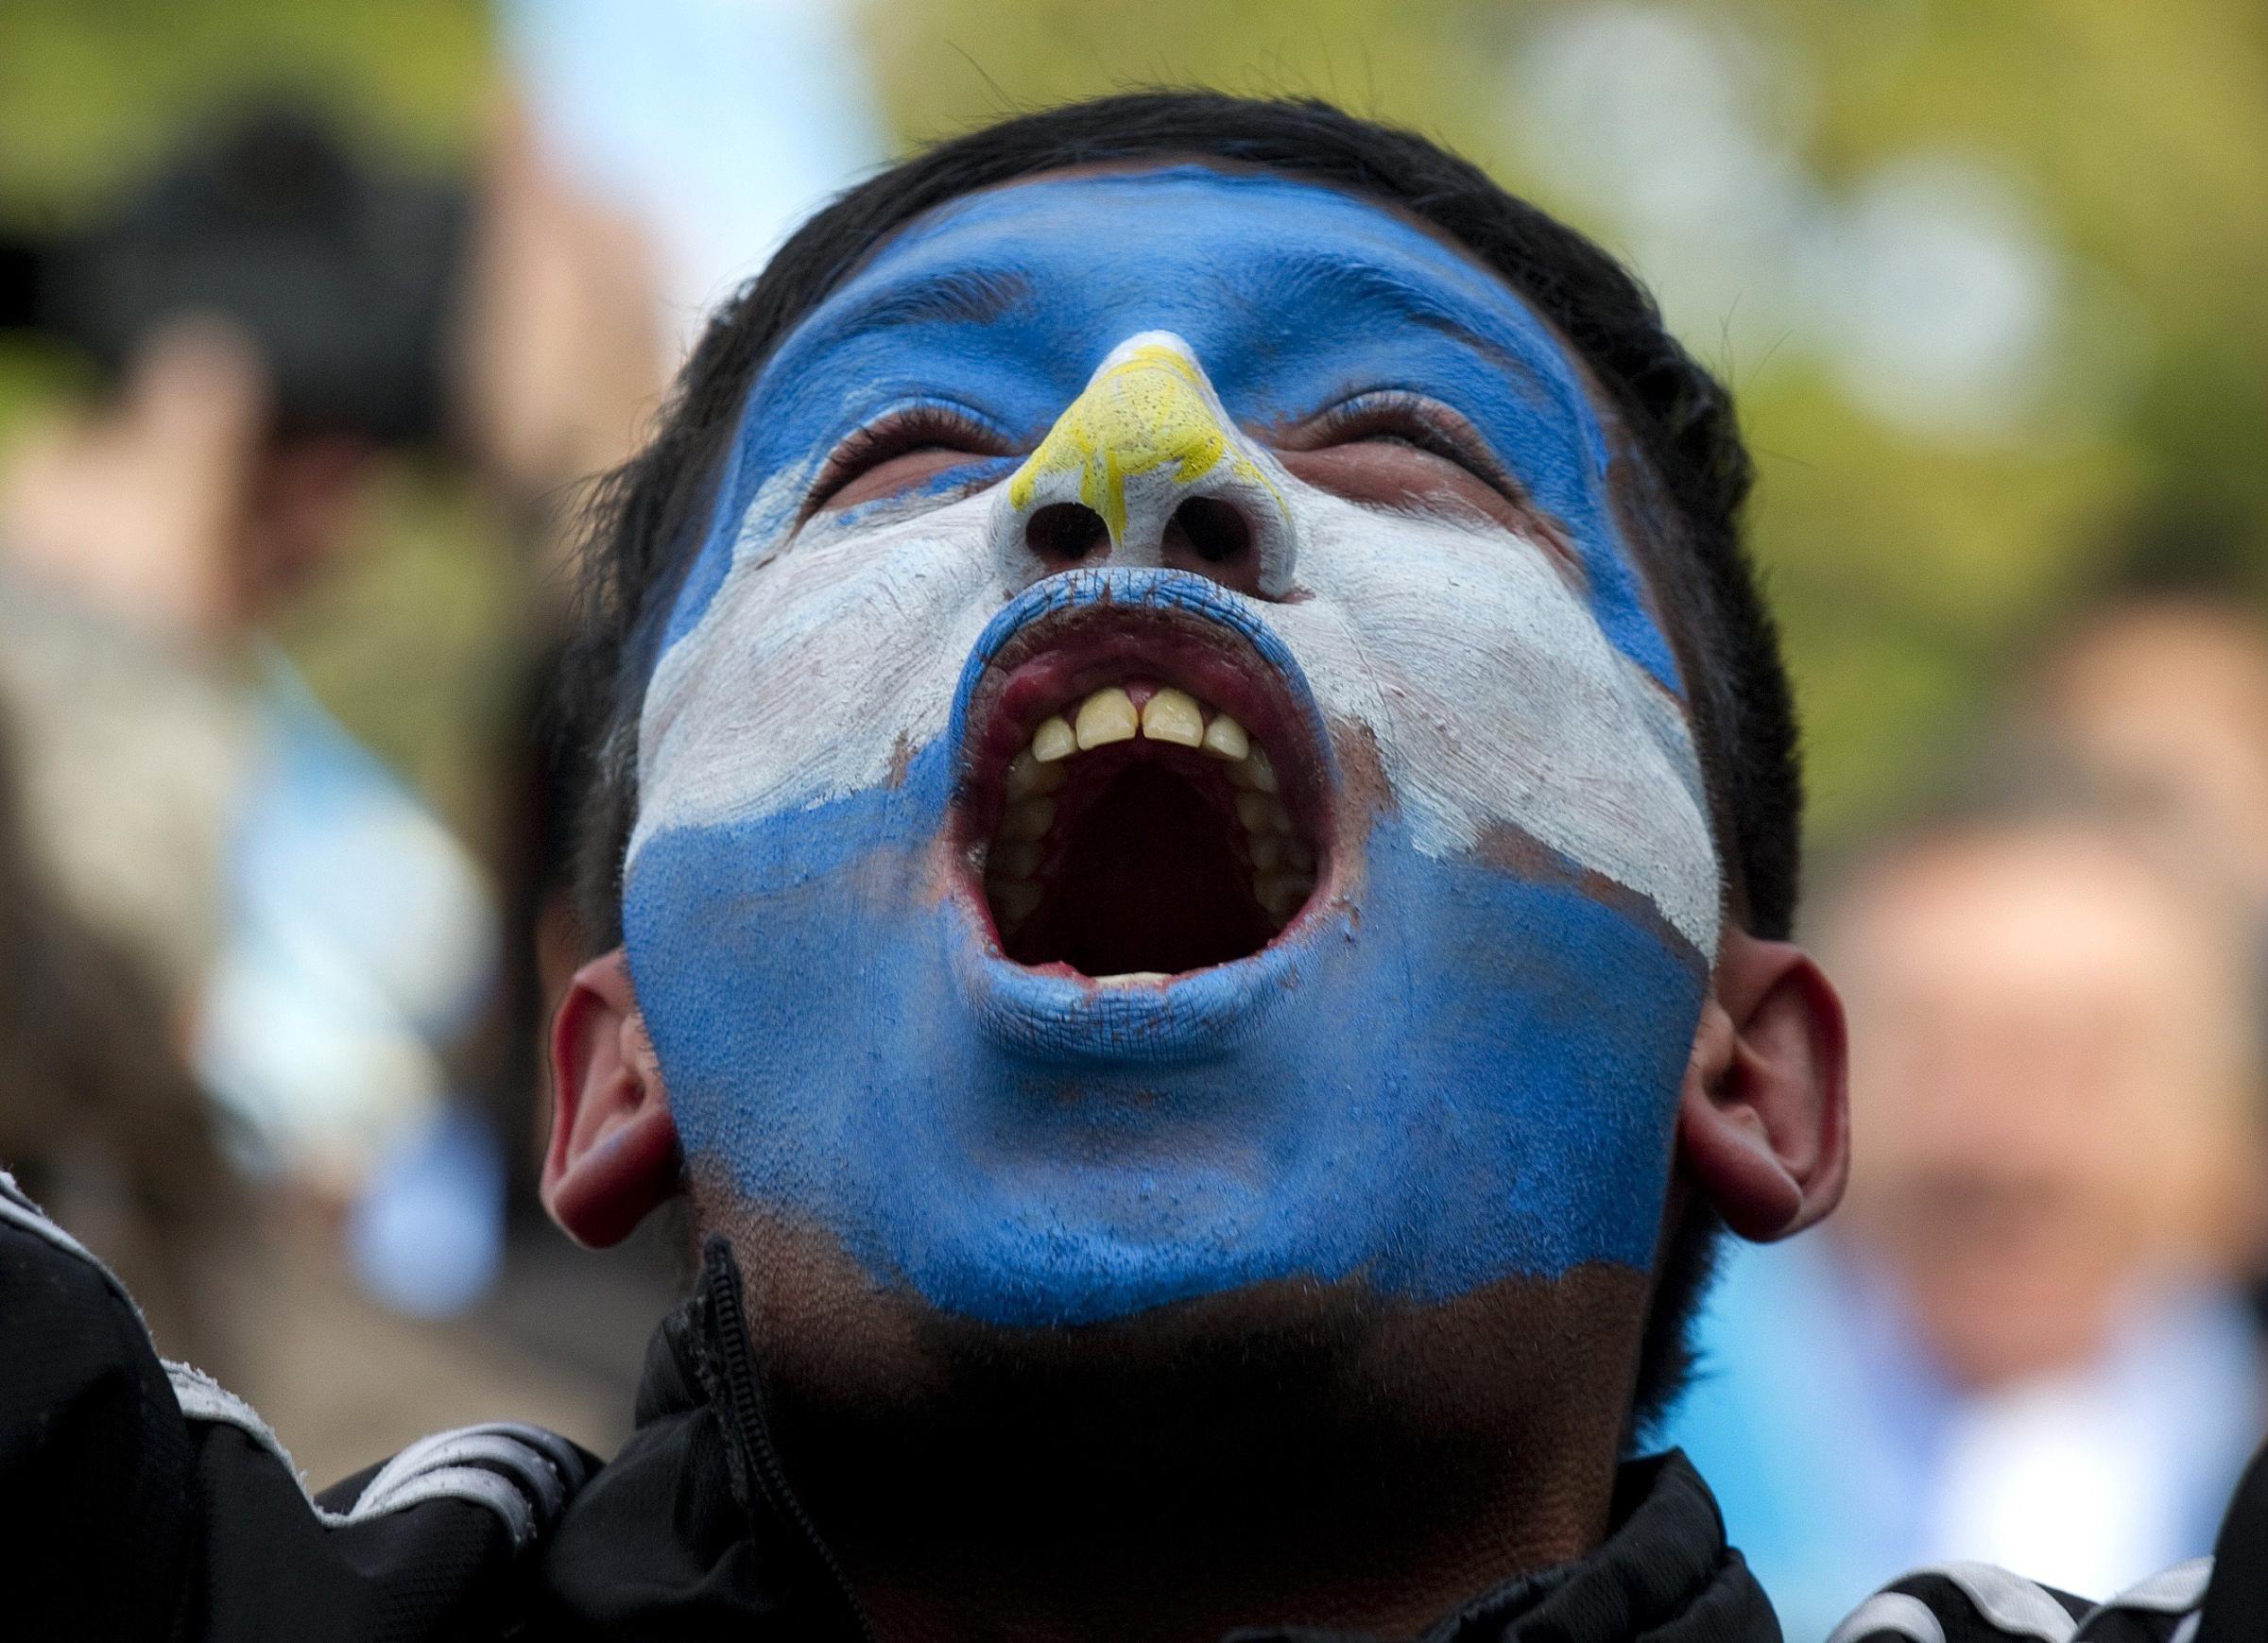 An Argentine fan celebrates while watching the match against Nigeria on a big screen at San Martin Square, in Buenos Aires on June 25, 2014.